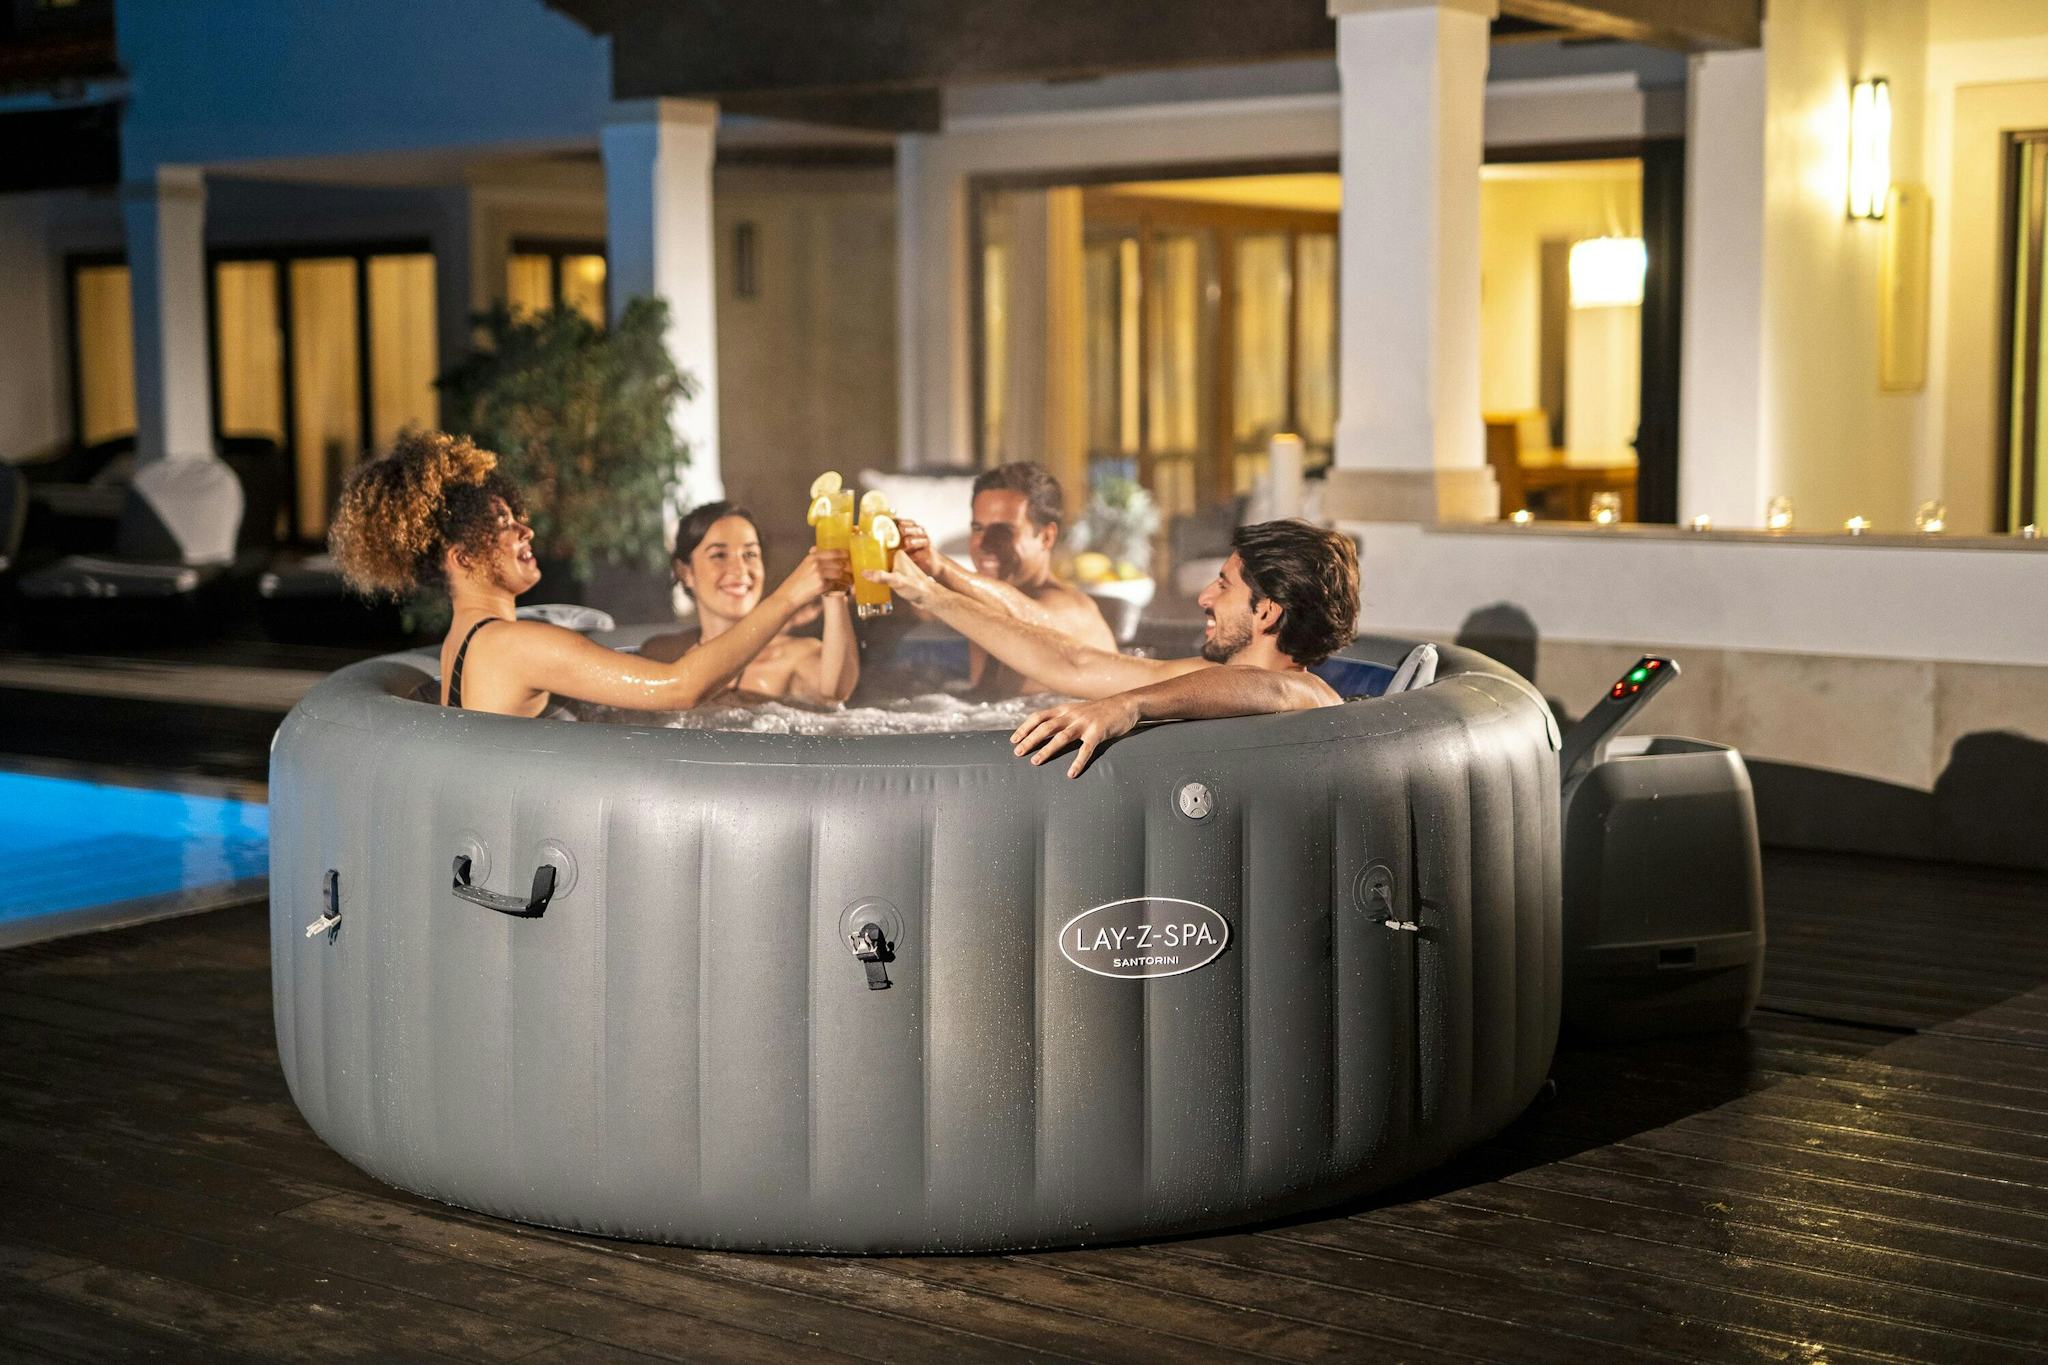 Spas Gonflables Spa gonflable rond Lay-Z-Spa Santorini Hydrojet pro™ 5 - 7 personnes Wifi Bestway 12